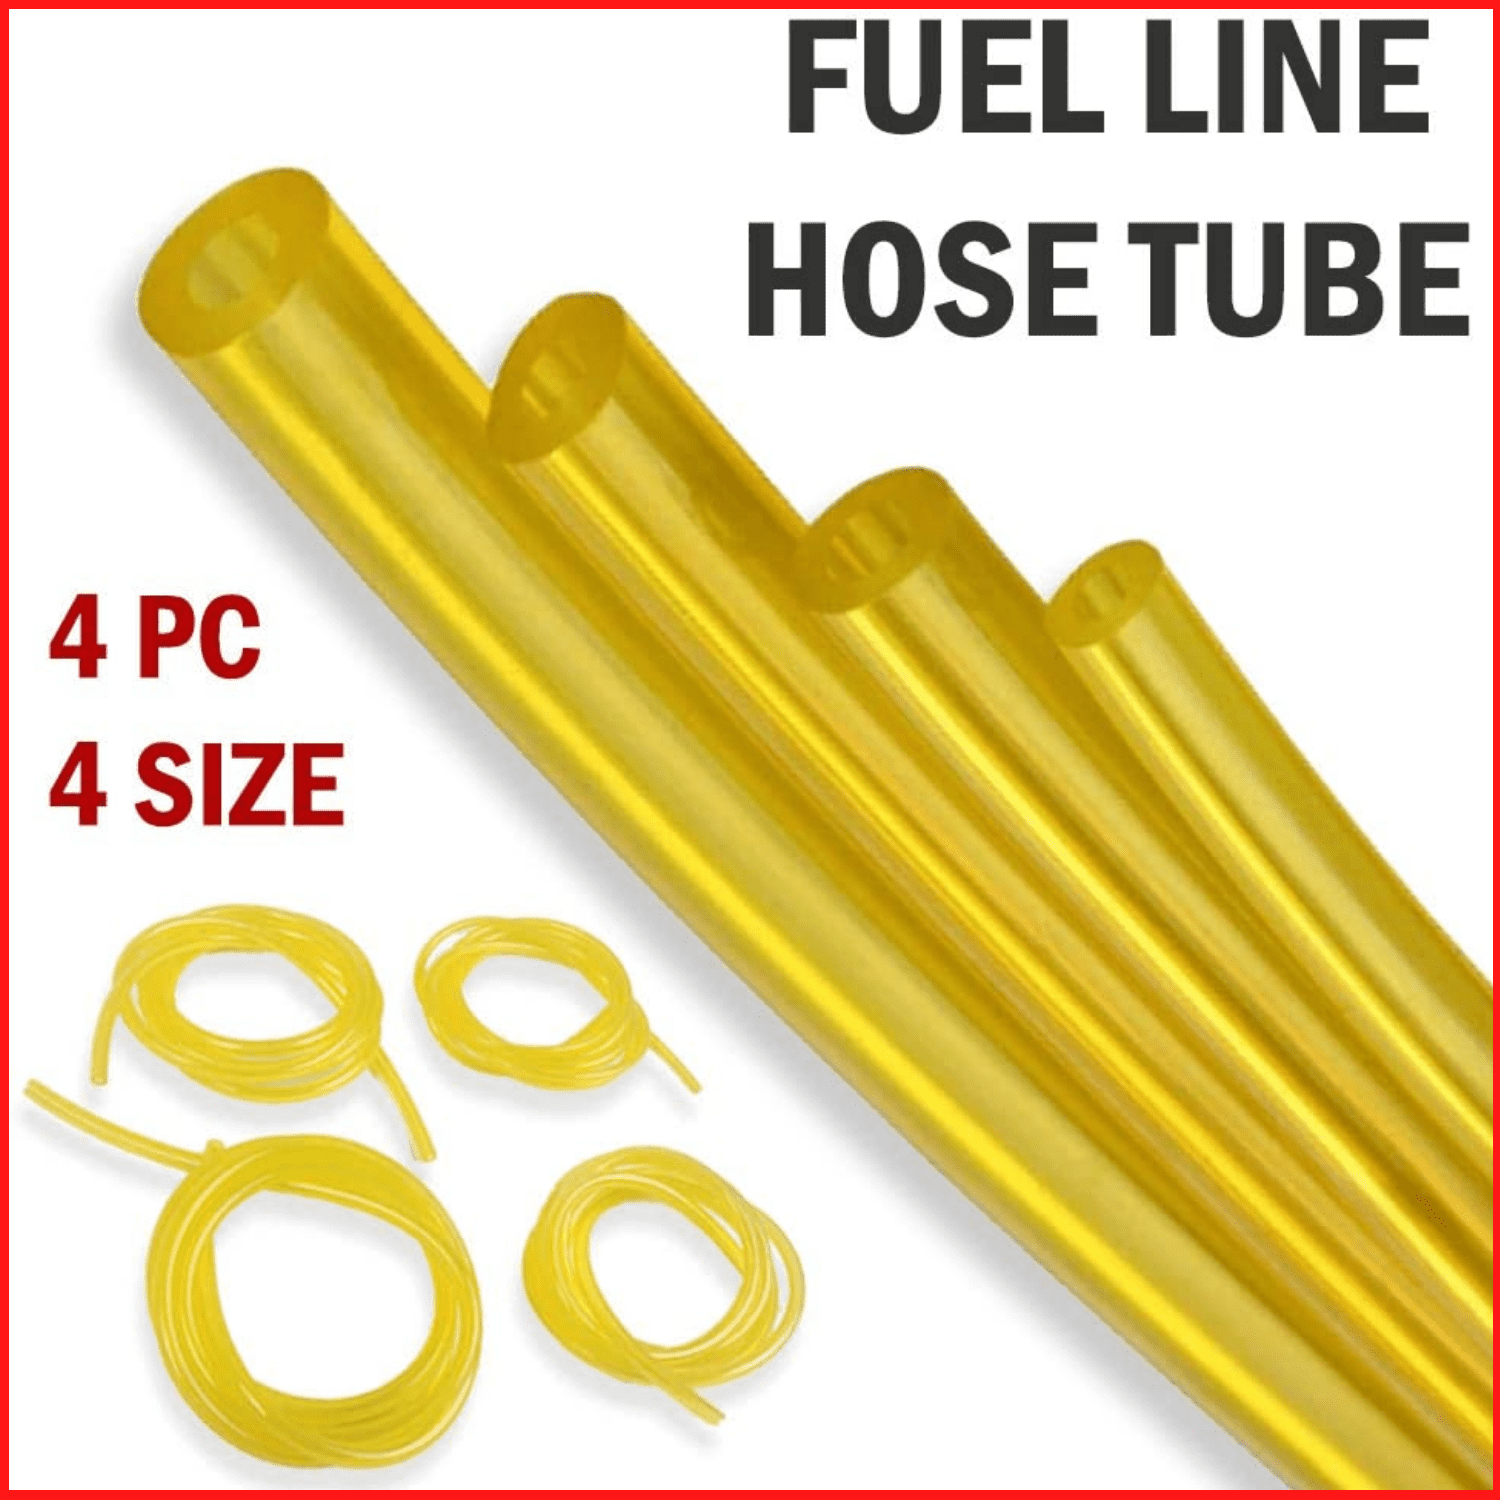 4Size Fuel Line Hose 4Ft Petrol Tubing Chain Saw Common Weedeater 2 Cycle Yellow 